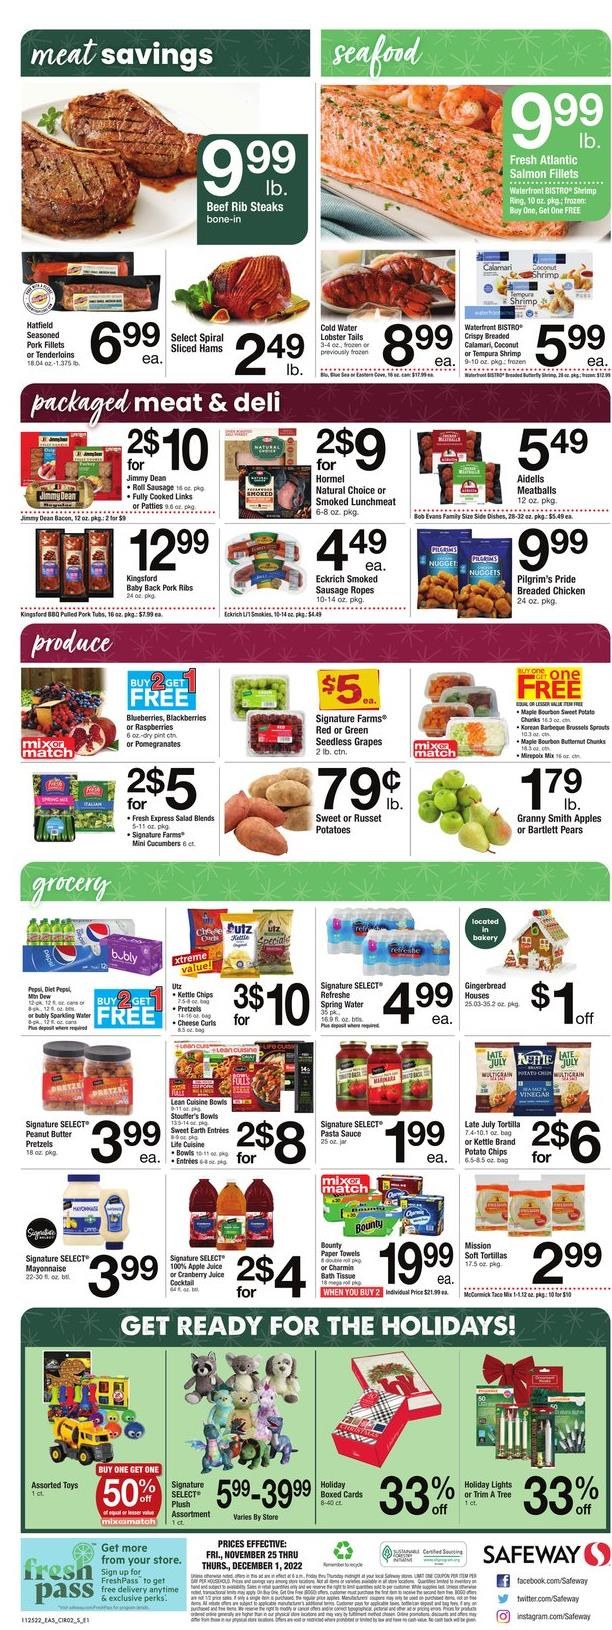 thumbnail - Safeway Flyer - 11/25/2022 - 12/01/2022 - Sales products - tortillas, pretzels, gingerbread, cucumber, russet potatoes, sweet potato, salad, brussel sprouts, Bartlett pears, blackberries, blueberries, grapes, seedless grapes, pears, Granny Smith, steak, Bob Evans, pork meat, pork ribs, pork back ribs, calamari, lobster, salmon, salmon fillet, seafood, lobster tail, shrimps, pasta sauce, meatballs, nuggets, sauce, fried chicken, Lean Cuisine, pulled pork, Jimmy Dean, Hormel, Kingsford, bacon, sausage, smoked sausage, lunch meat, cheese, mayonnaise, Bounty, potato chips, peanut butter, apple juice, cranberry juice, Pepsi, juice, Diet Pepsi, spring water, sparkling water, bath tissue, kitchen towels, paper towels, Charmin, boxed card, toys, butternut squash, pomegranate. Page 3.